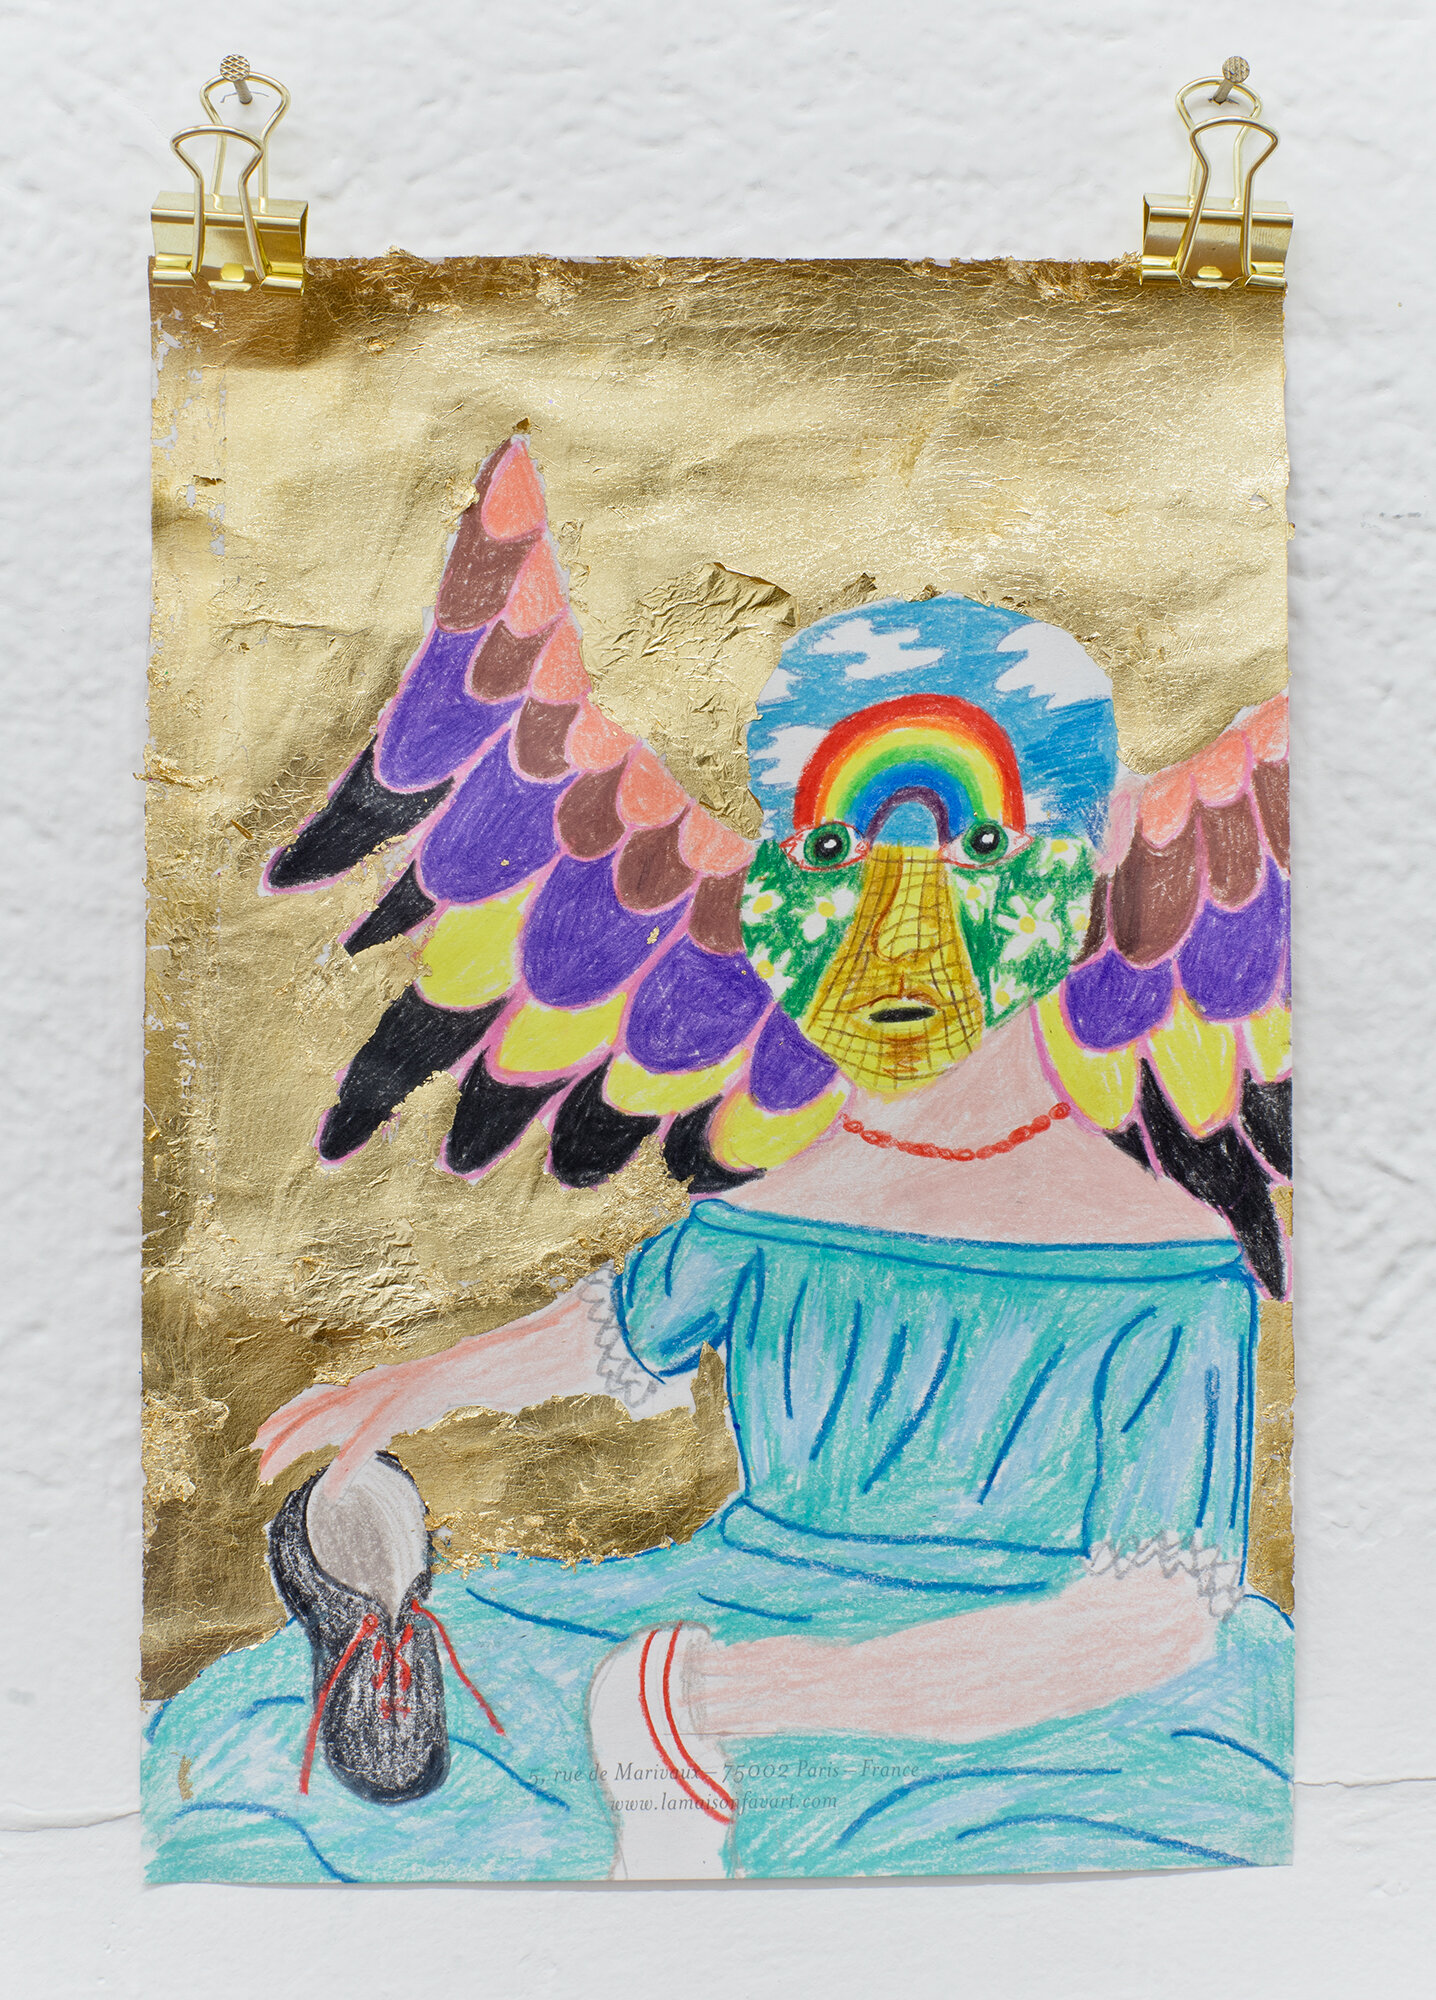   Baby Angel,  2017  8.25 x 6 inches (20.95 x 15.24 cm.)  Colored pencil and gilt on hotel stationary 